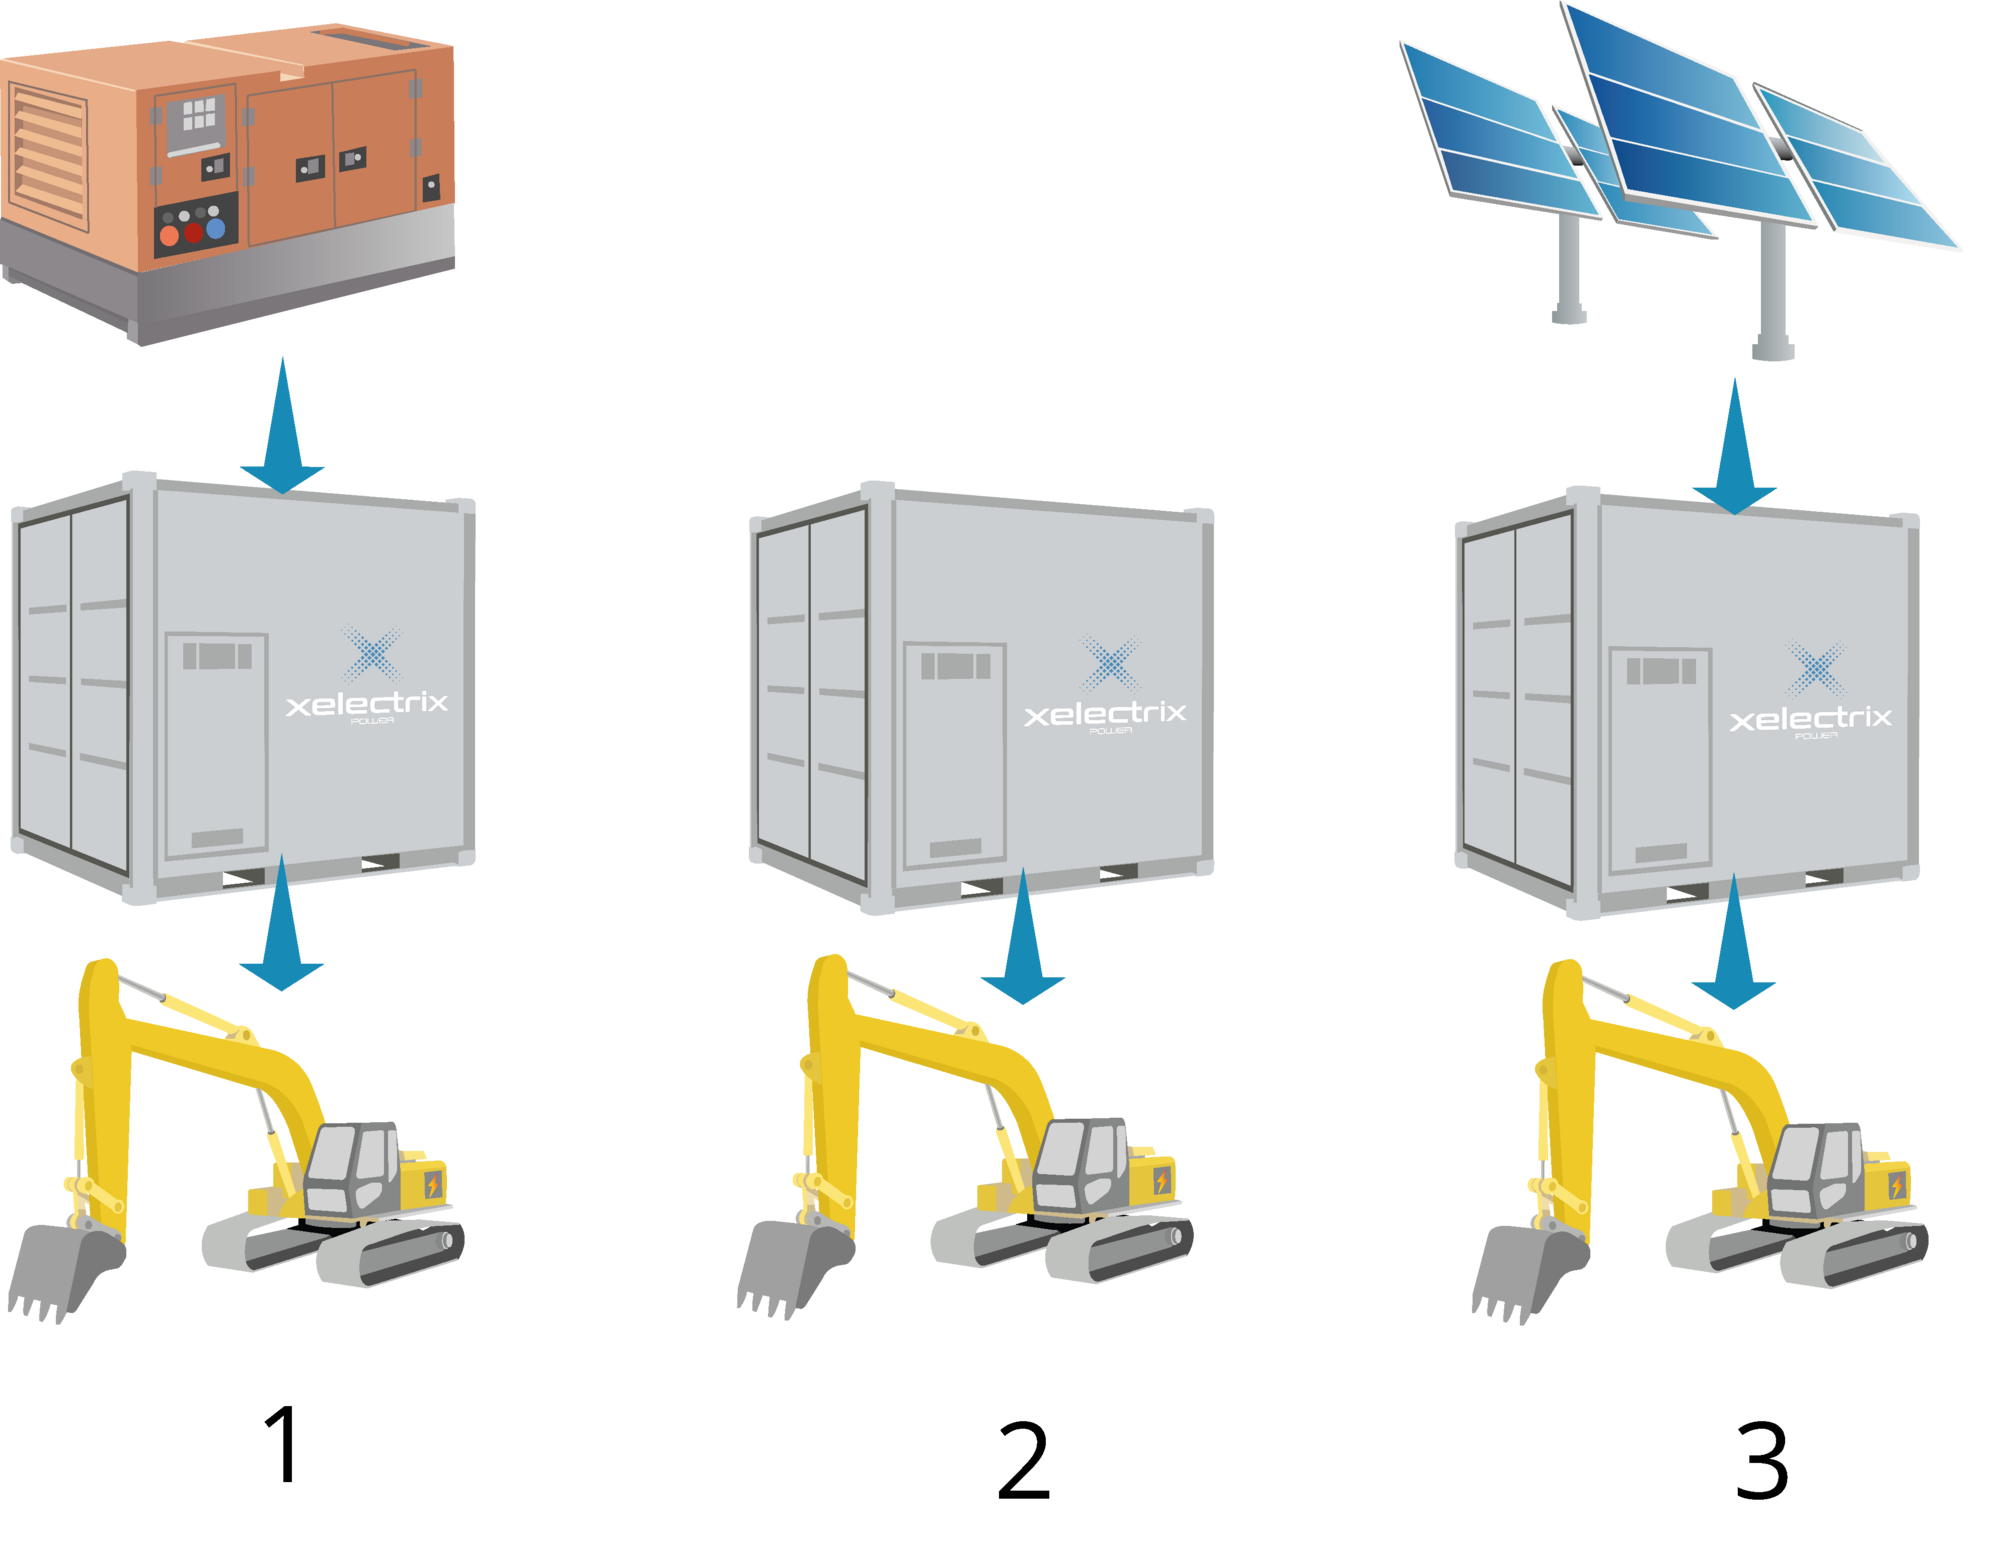 Off-grid charging, power box with diesel generator, energy storage with solar, charging without electricity grid